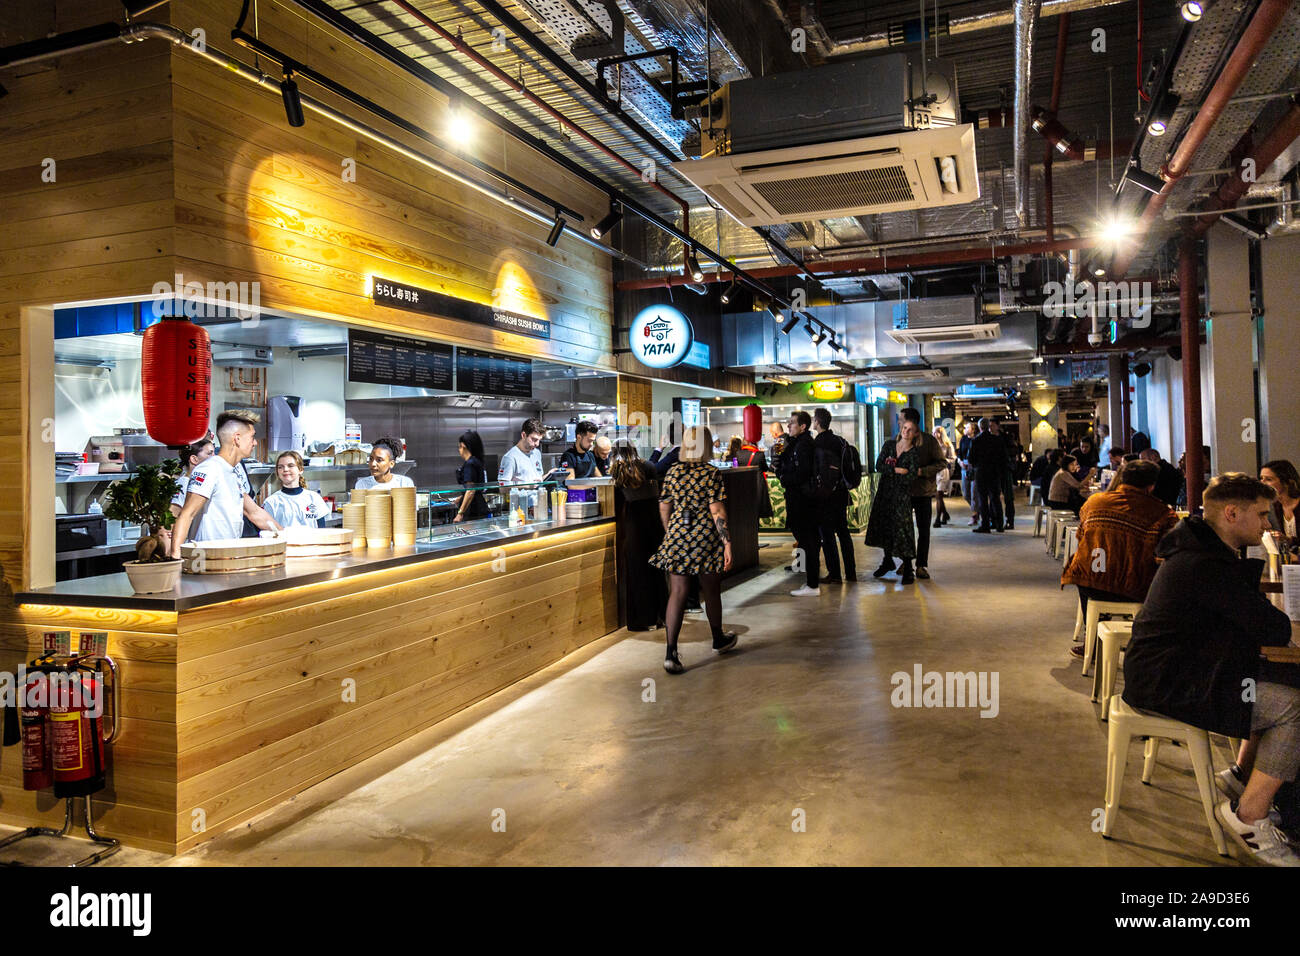 15th November 2019 - Opening of Market Hall West End, London, UK, Yatai by Angelo Sato Japanese food and sando stall Stock Photo